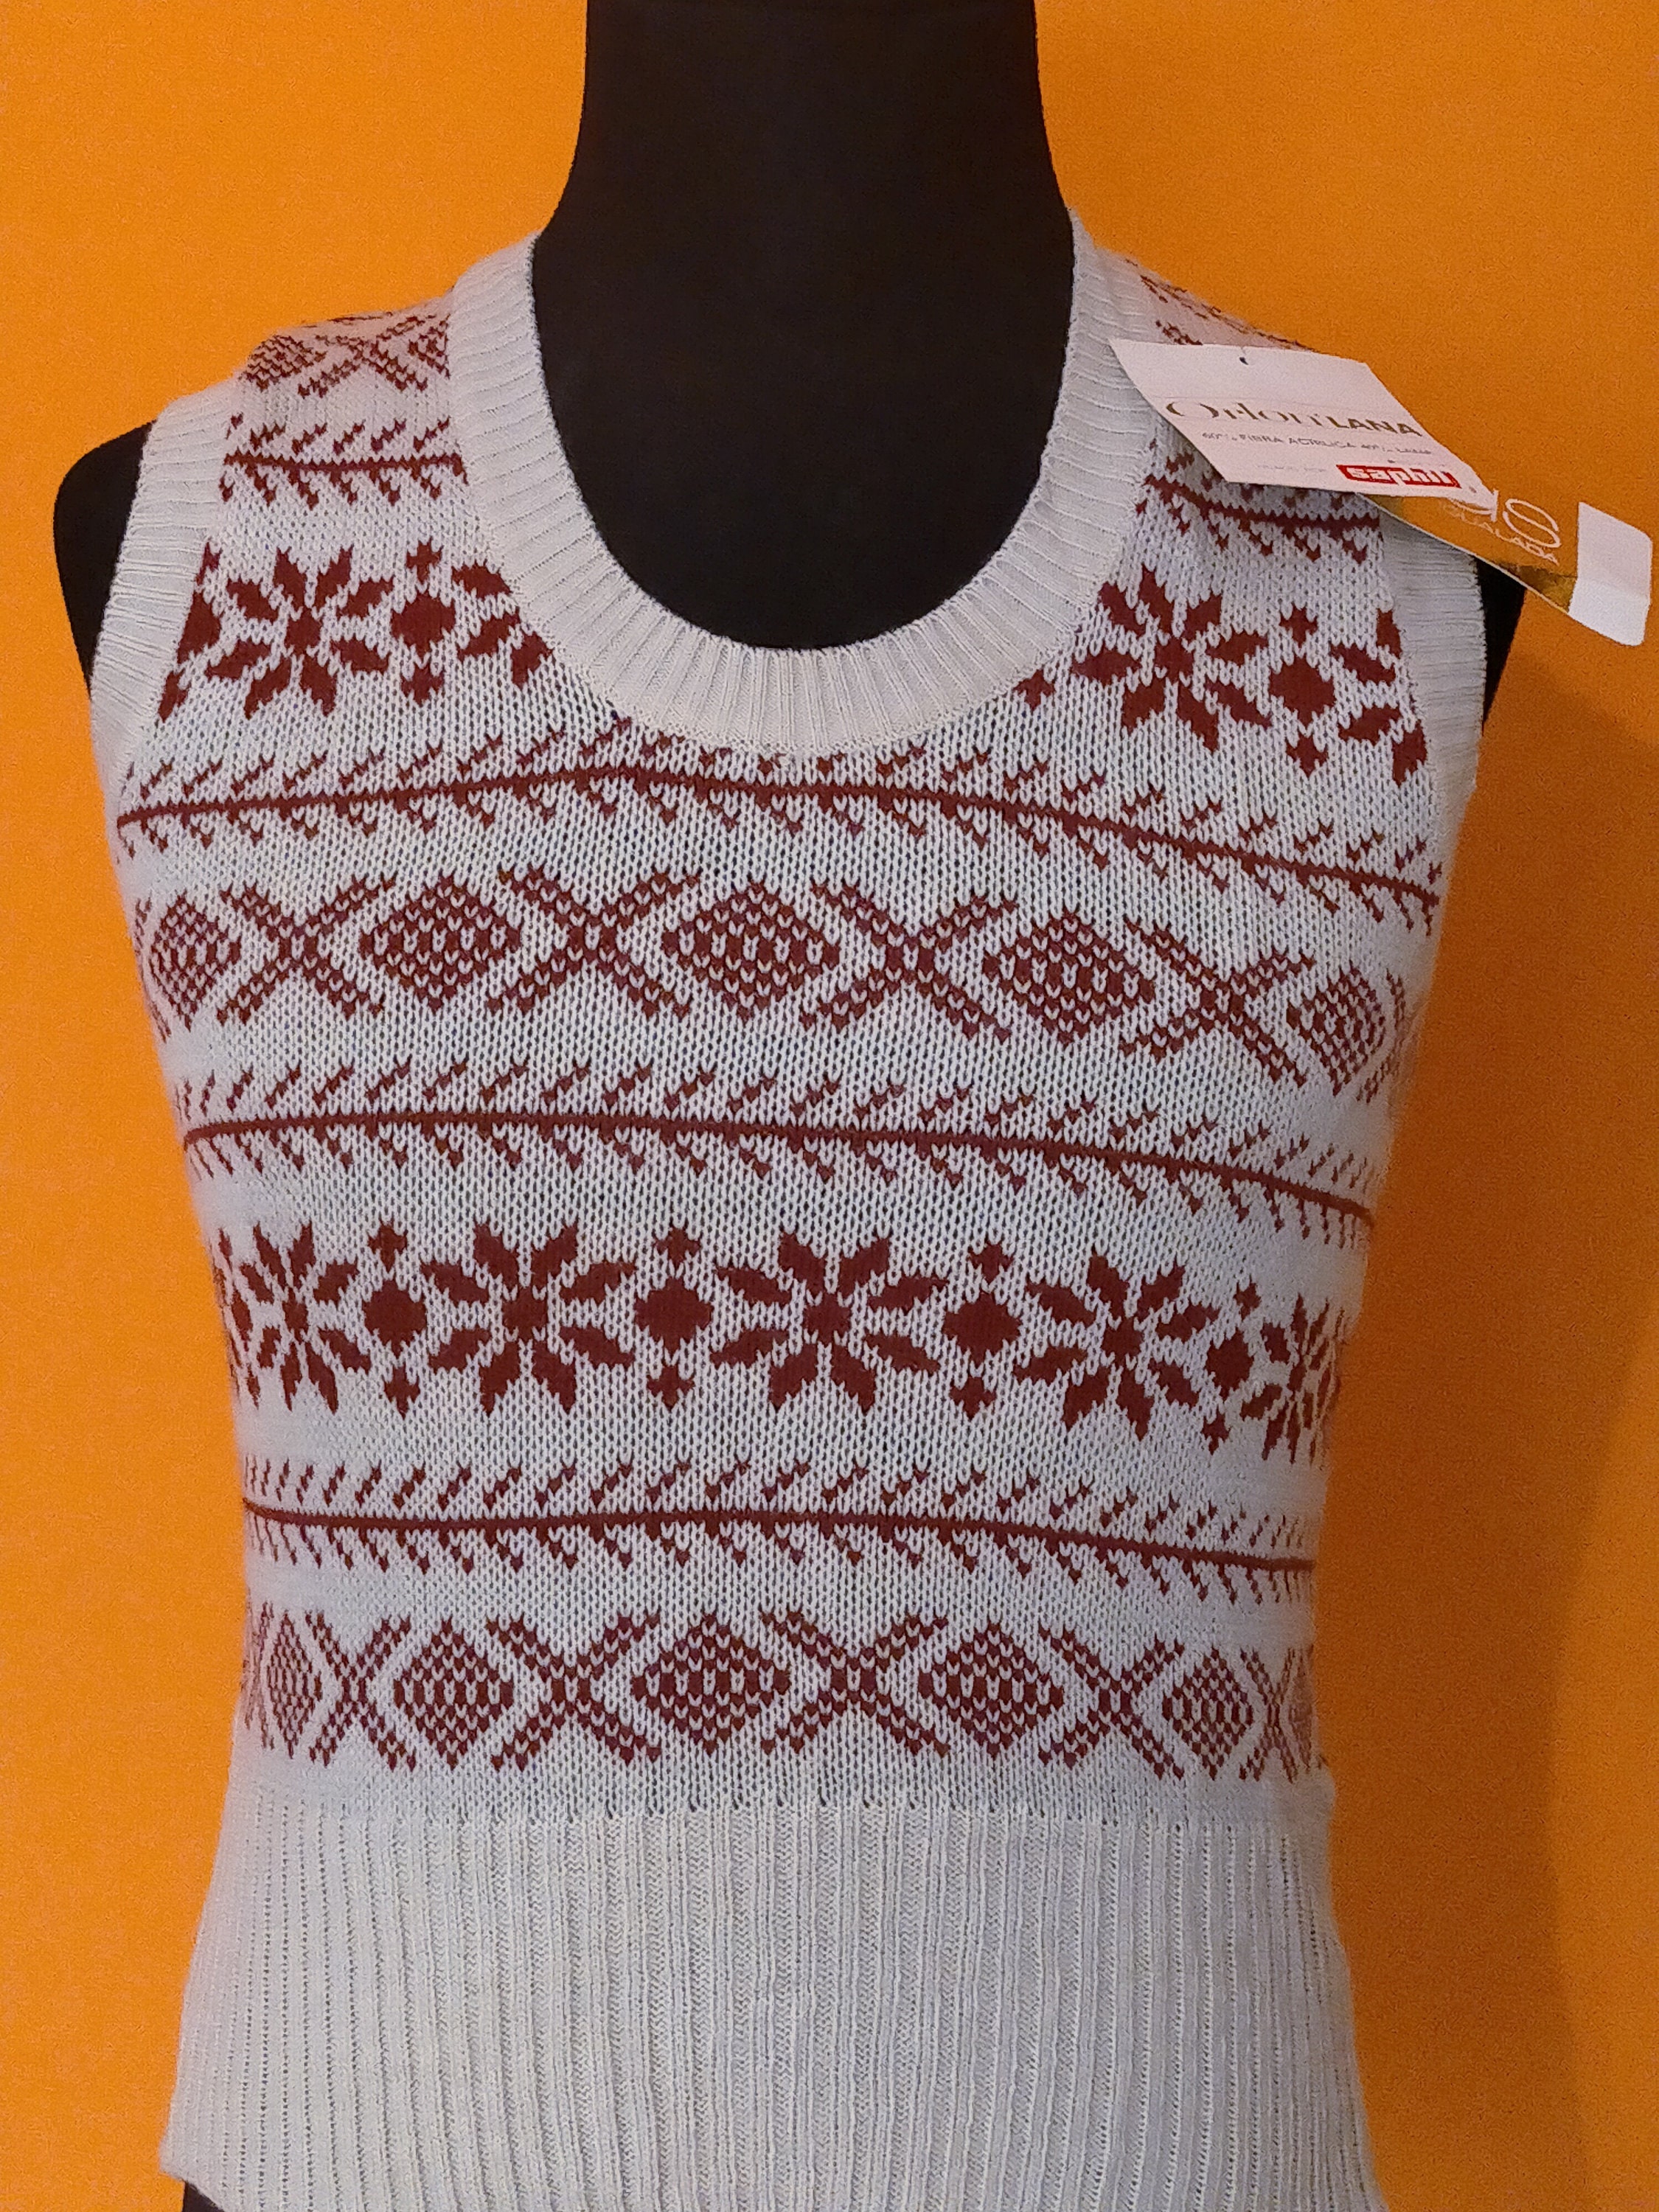 Vintage Deadstock NWT 70's Tank Top 